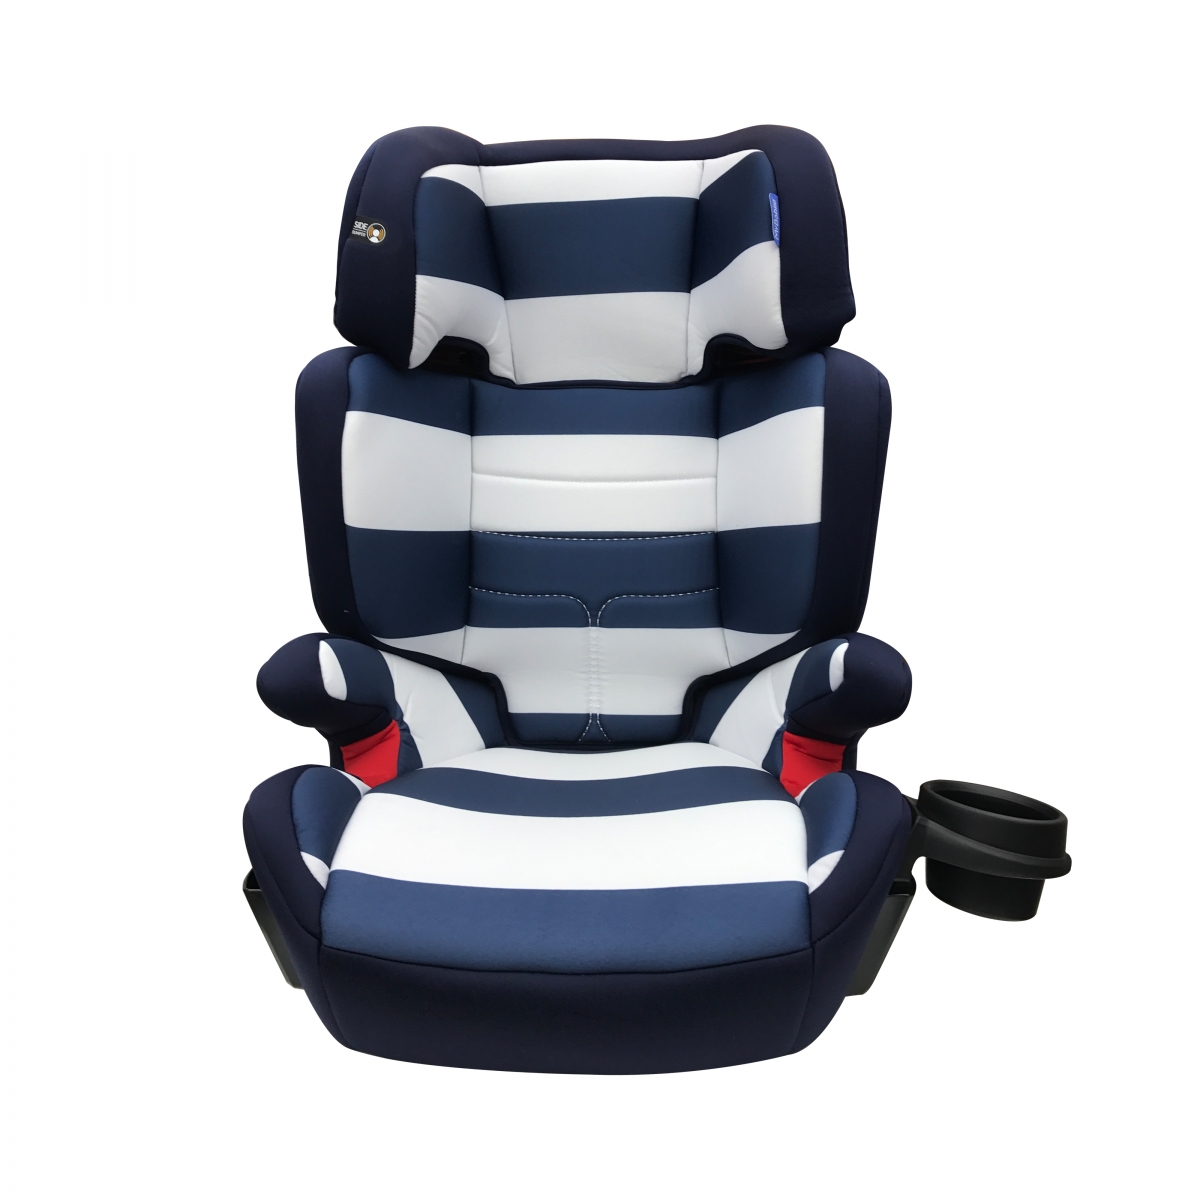 My Babiie Group 2/3 Car Seat-Blue Stripes (MBCS23BS) 